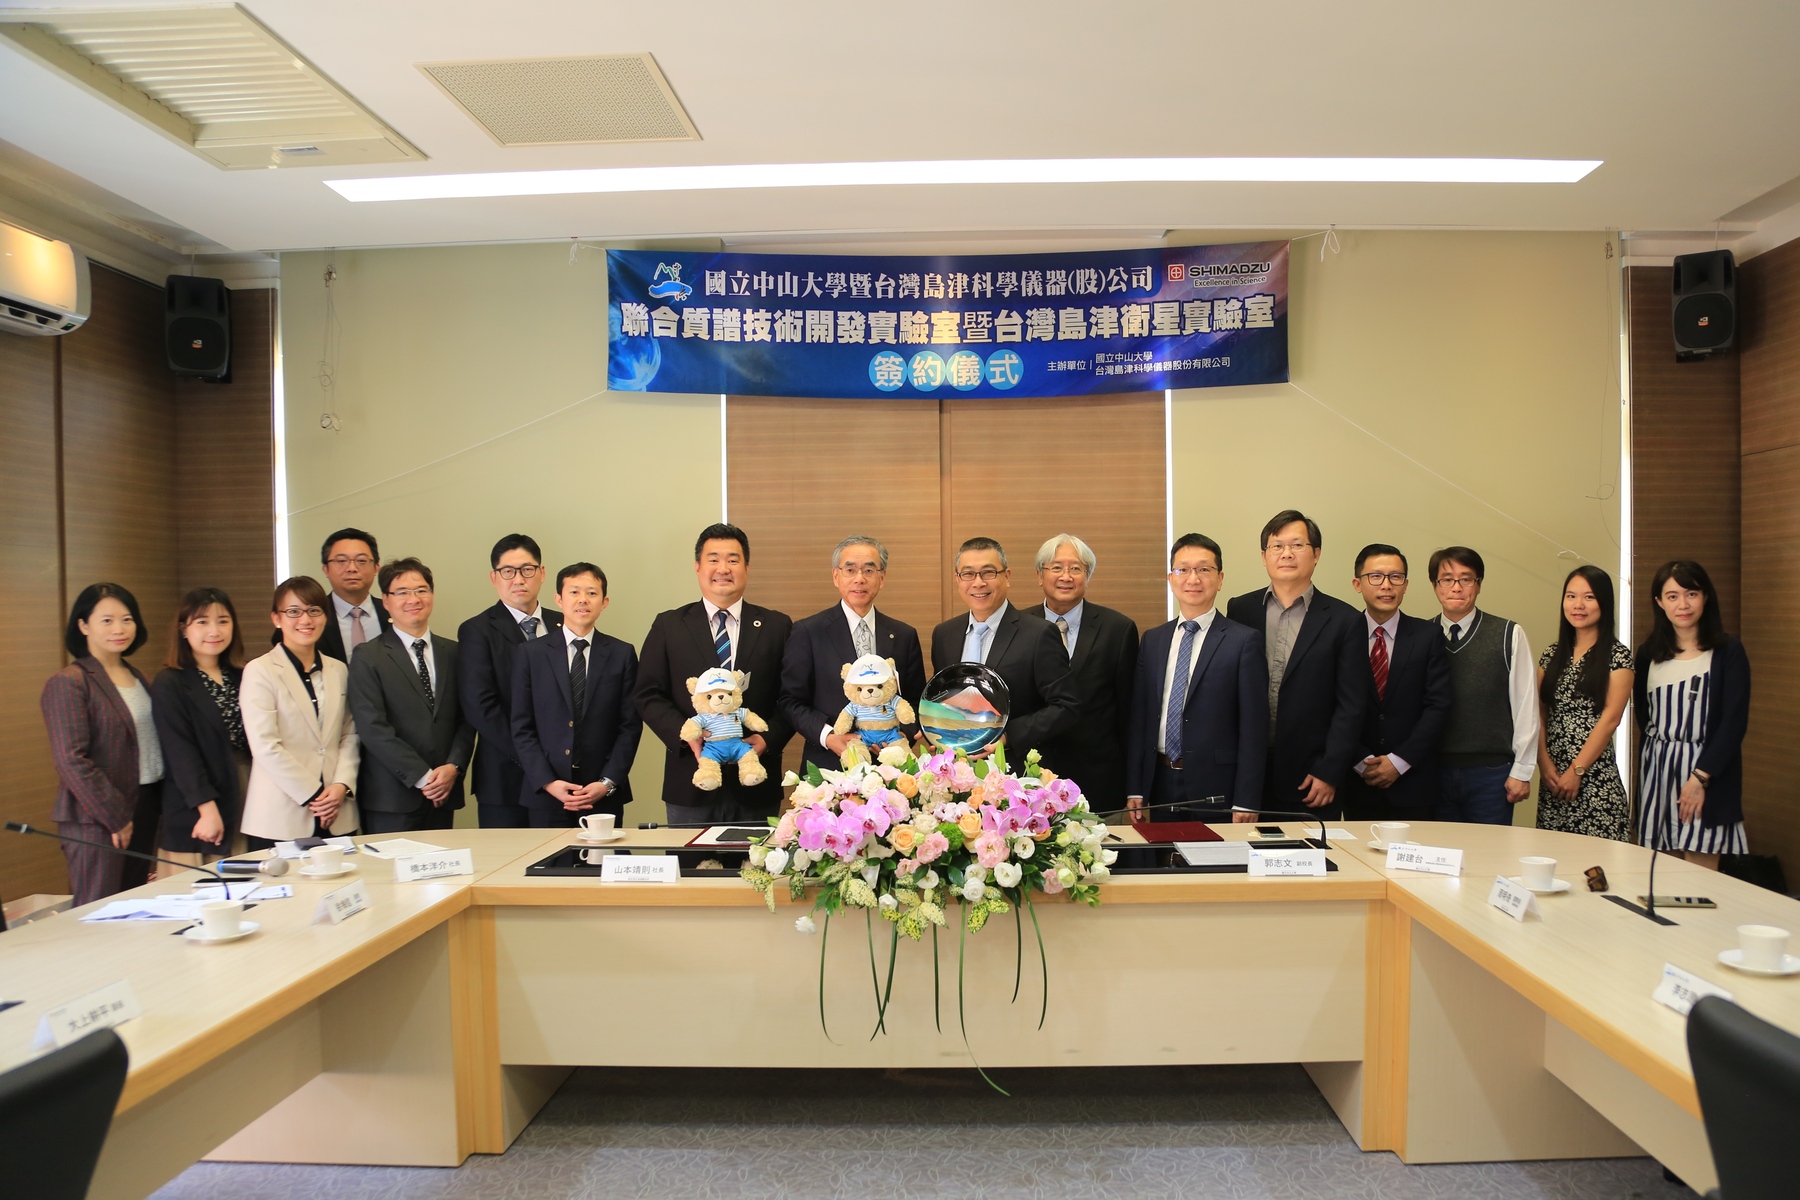 The Rapid Screening Research Center for Toxicology and Biomedicine (RSRCTB) at NSYSU officially announced the collaboration with Shimadzu Corporation, the largest analytical and measuring instruments manufacturer in Japan on March 10th, 2023, building the first Satellite Laboratory in Taiwan.